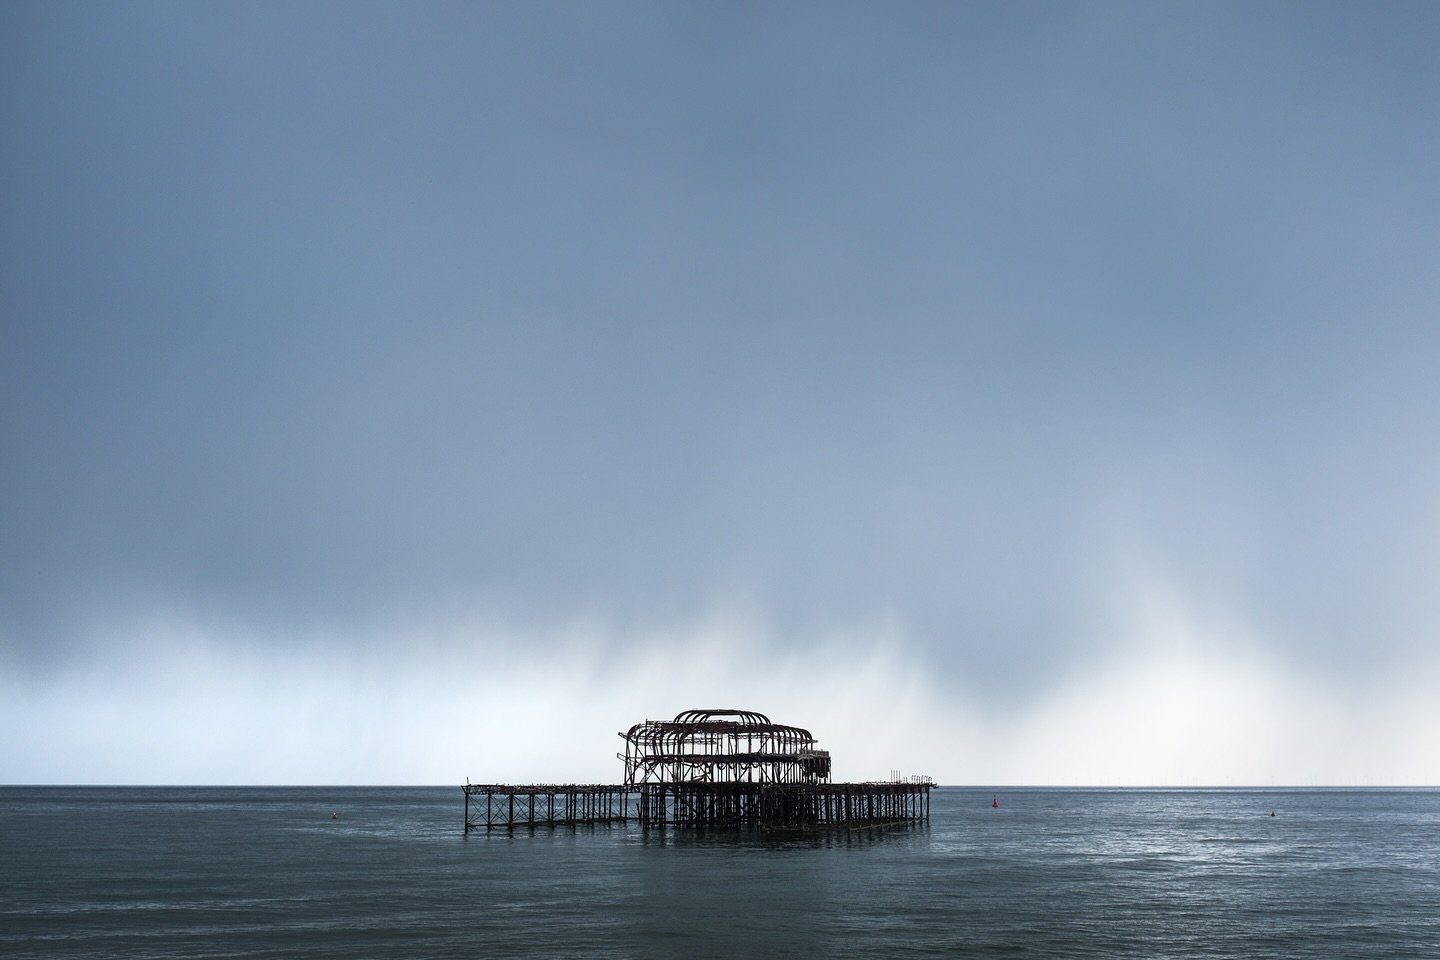 In between raindrops it&rsquo;s not really raining at all. We&rsquo;re open all day, come and laugh at the futility of it all with us. 

#brightonphotography #bankholidaymonday